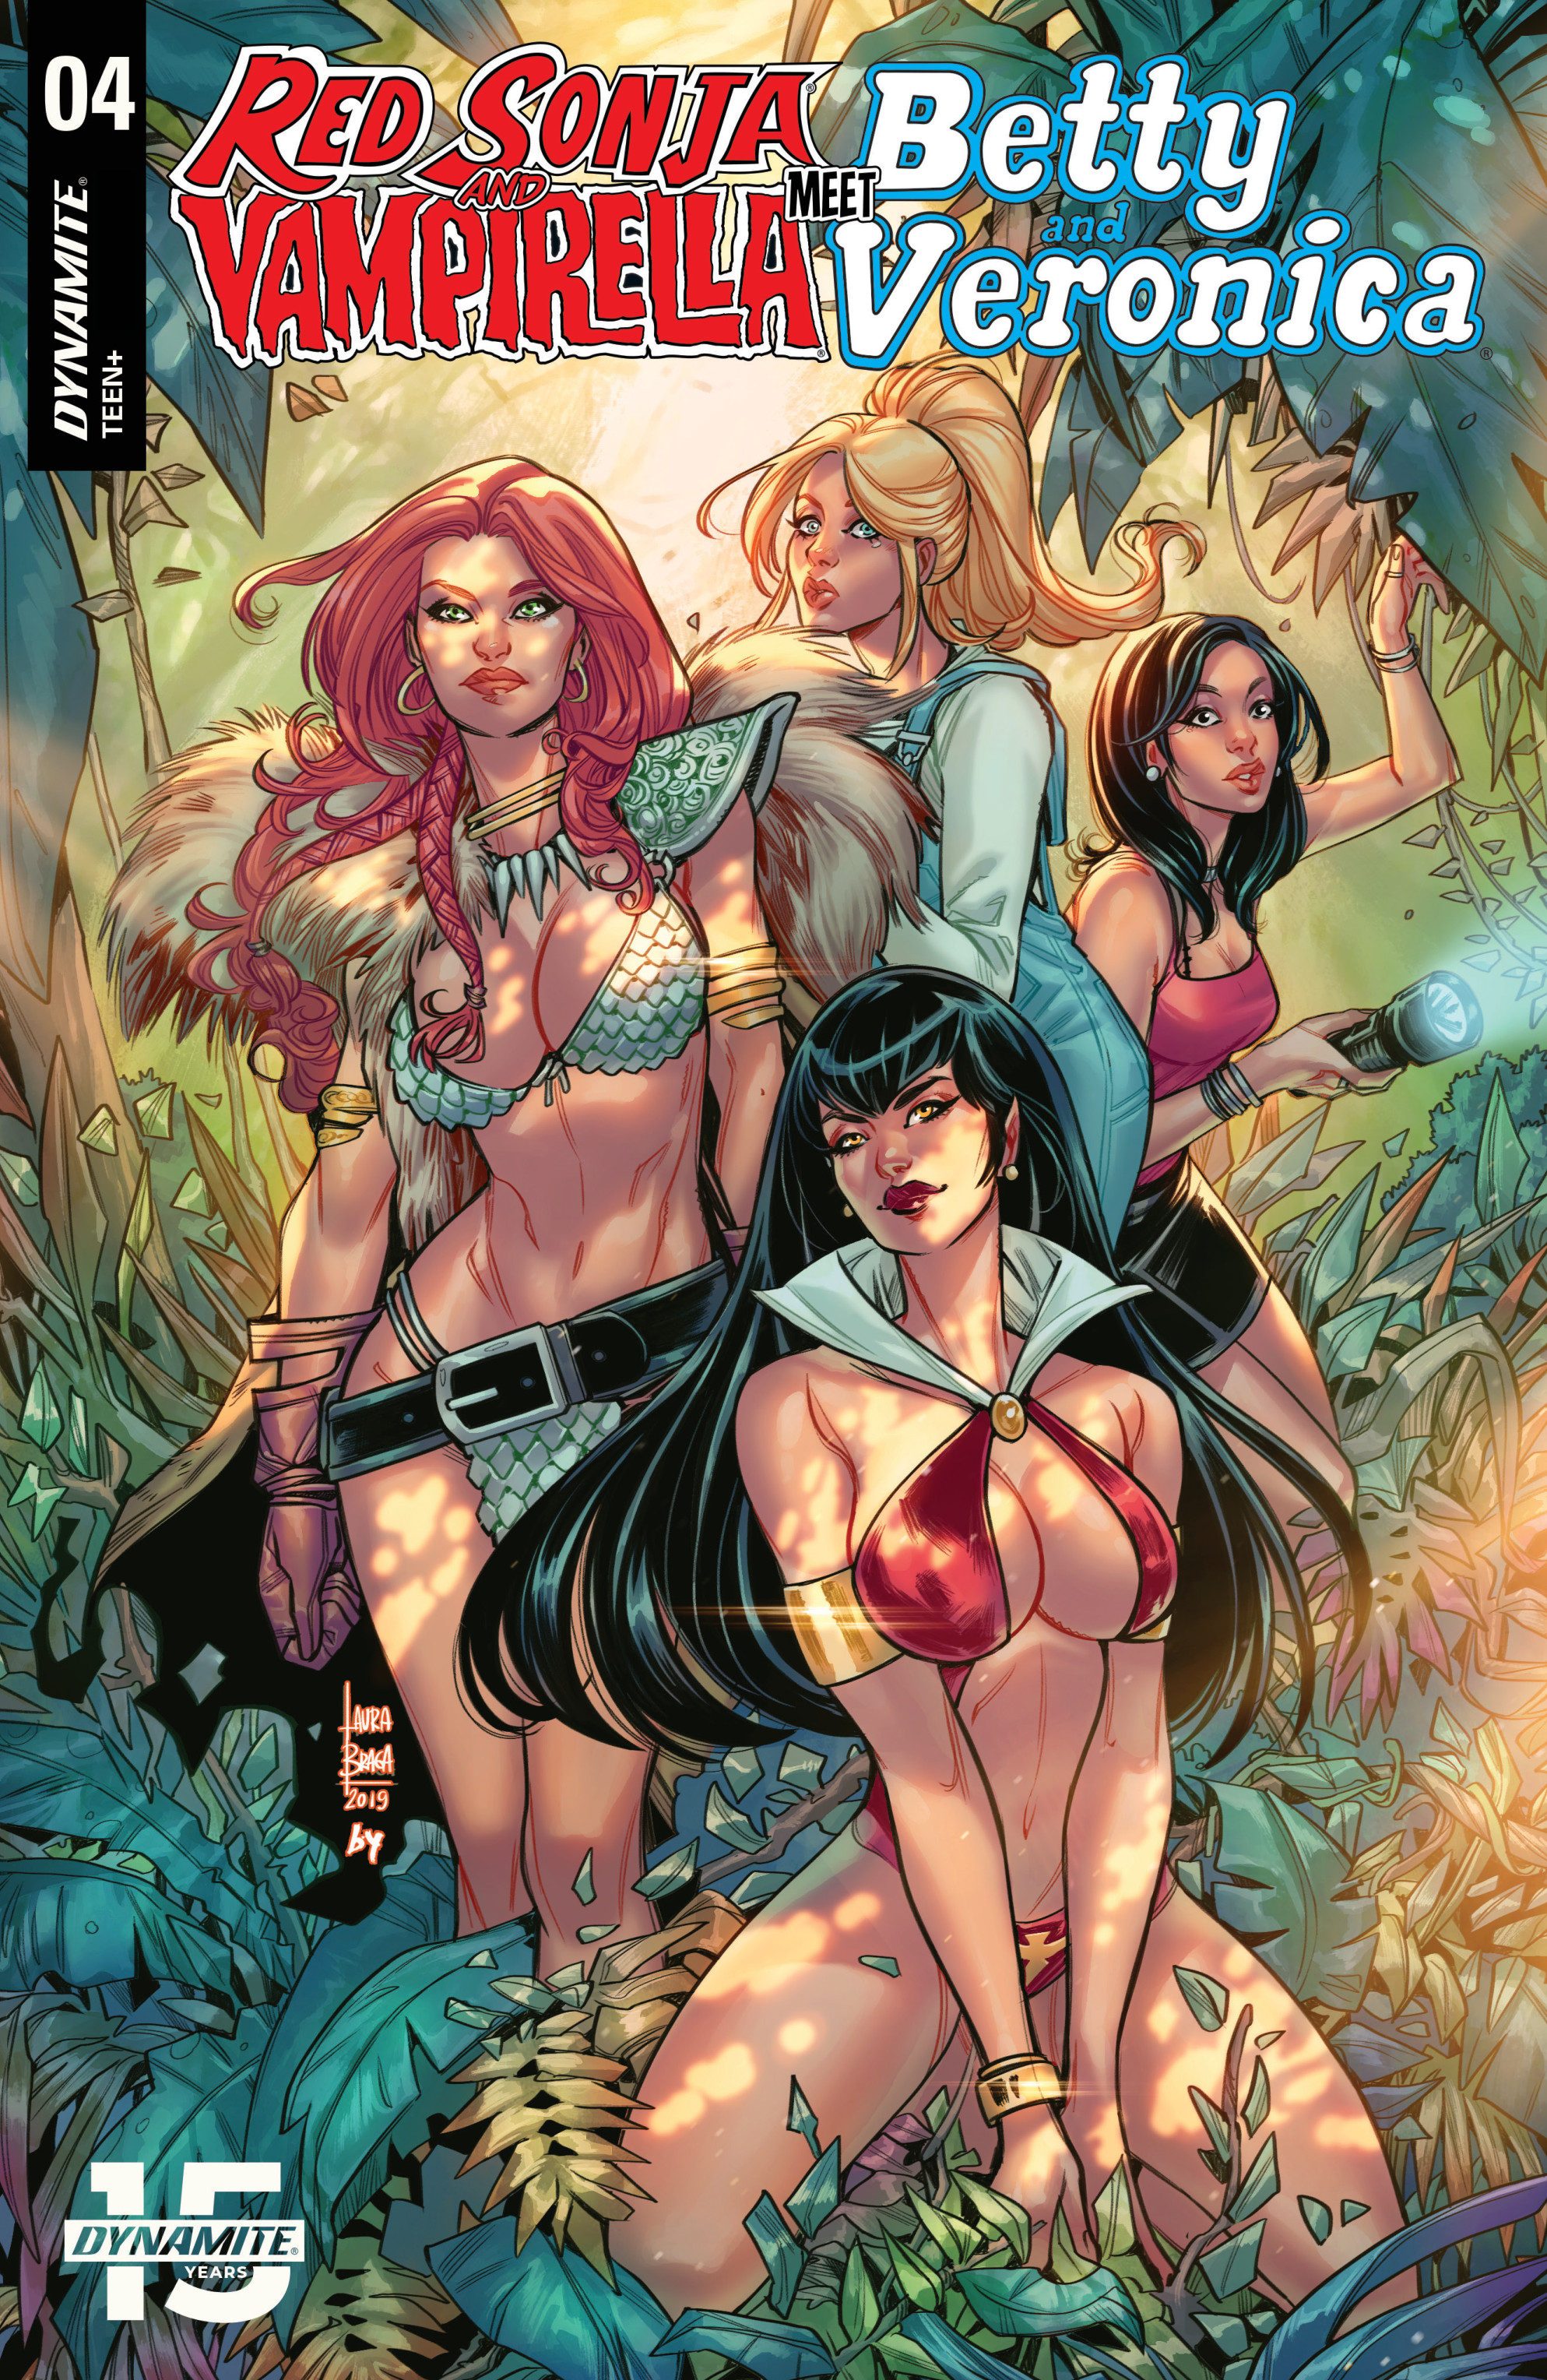 Read online Red Sonja and Vampirella Meet Betty and Veronica comic -  Issue #4 - 3